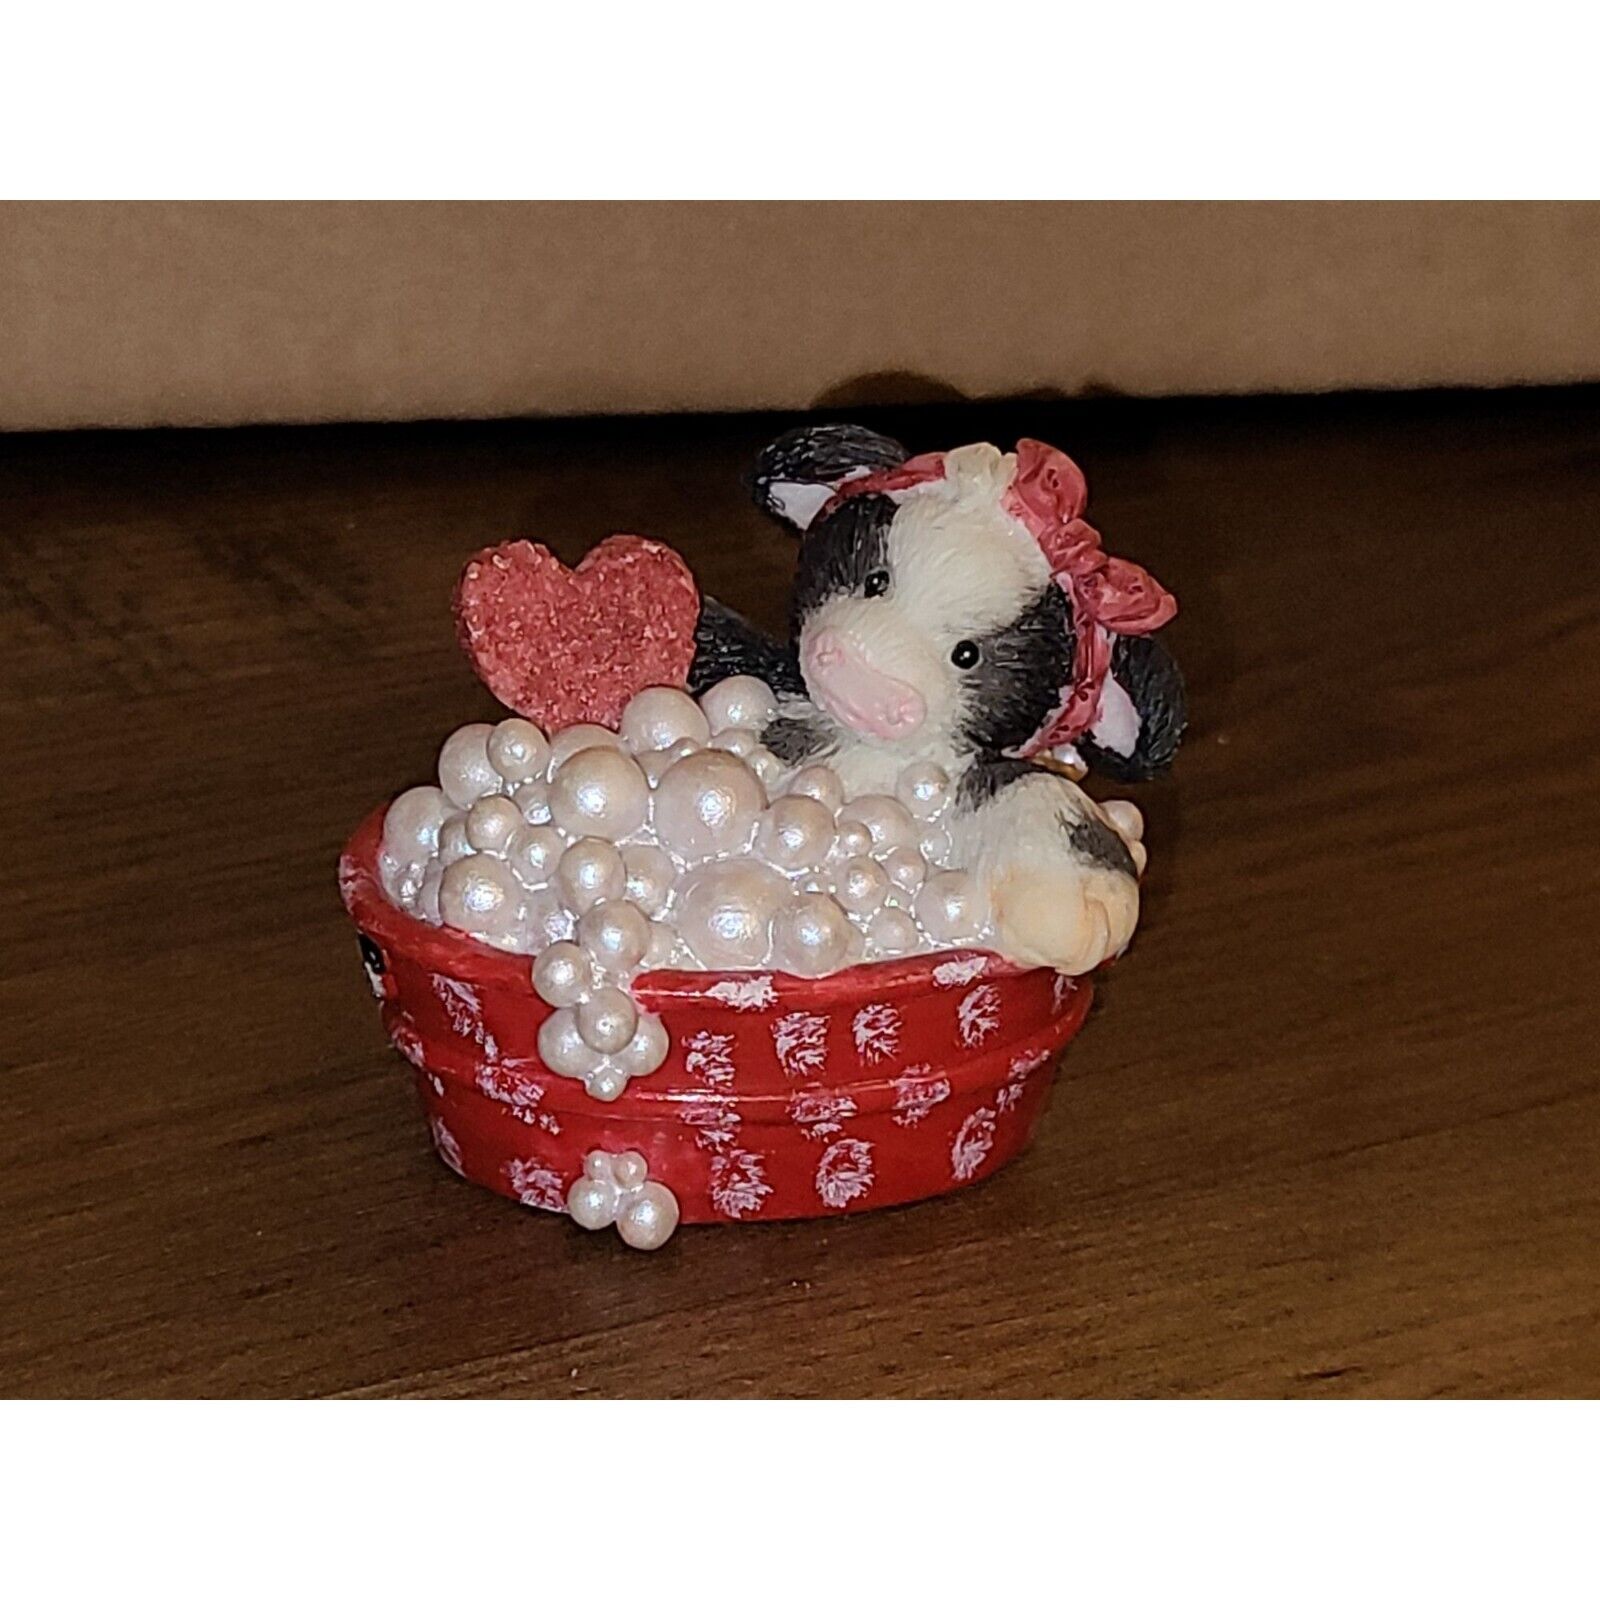 Mary\'s Moo Moos Bubbling Over with Love Figurine #104736 in Bucket Bubble Bath